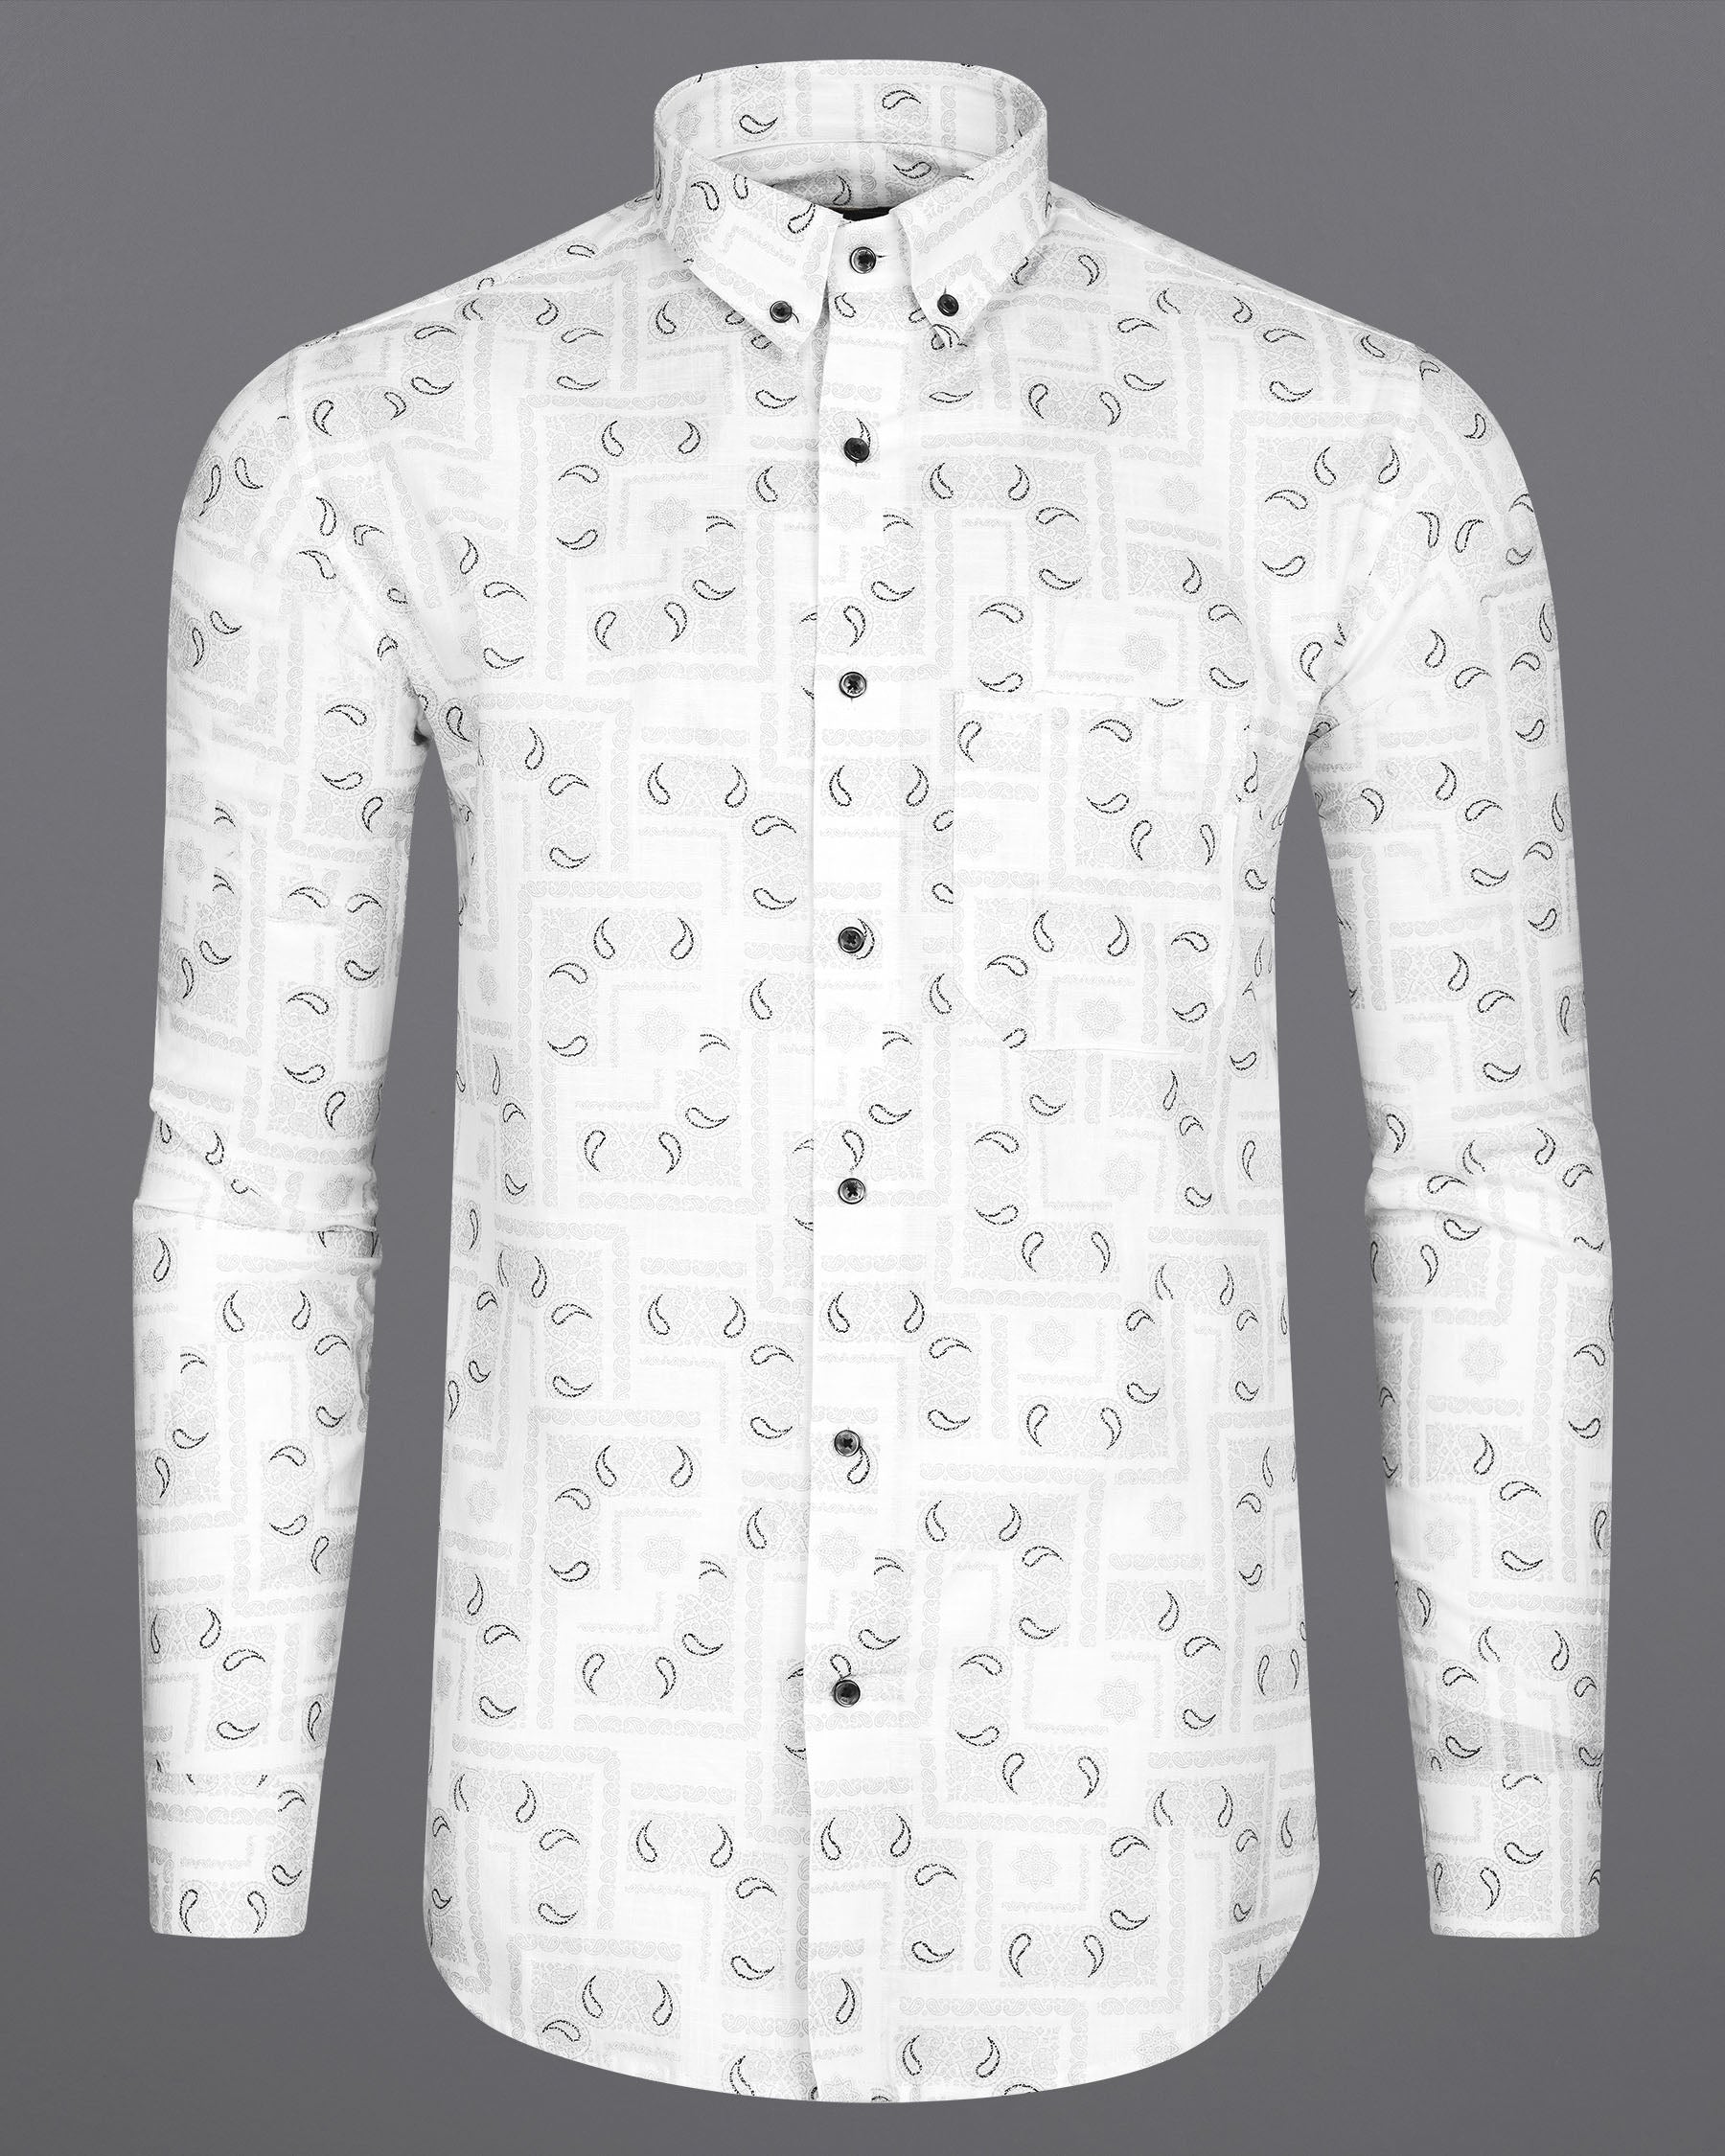 Bright White Paisley Printed Luxurious Linen Shirt 7845-BD-BLK-38, 7845-BD-BLK-H-38, 7845-BD-BLK-39,7845-BD-BLK-H-39, 7845-BD-BLK-40, 7845-BD-BLK-H-40, 7845-BD-BLK-42, 7845-BD-BLK-H-42, 7845-BD-BLK-44, 7845-BD-BLK-H-44, 7845-BD-BLK-46, 7845-BD-BLK-H-46, 7845-BD-BLK-48, 7845-BD-BLK-H-48, 7845-BD-BLK-50, 7845-BD-BLK-H-50, 7845-BD-BLK-52, 7845-BD-BLK-H-52